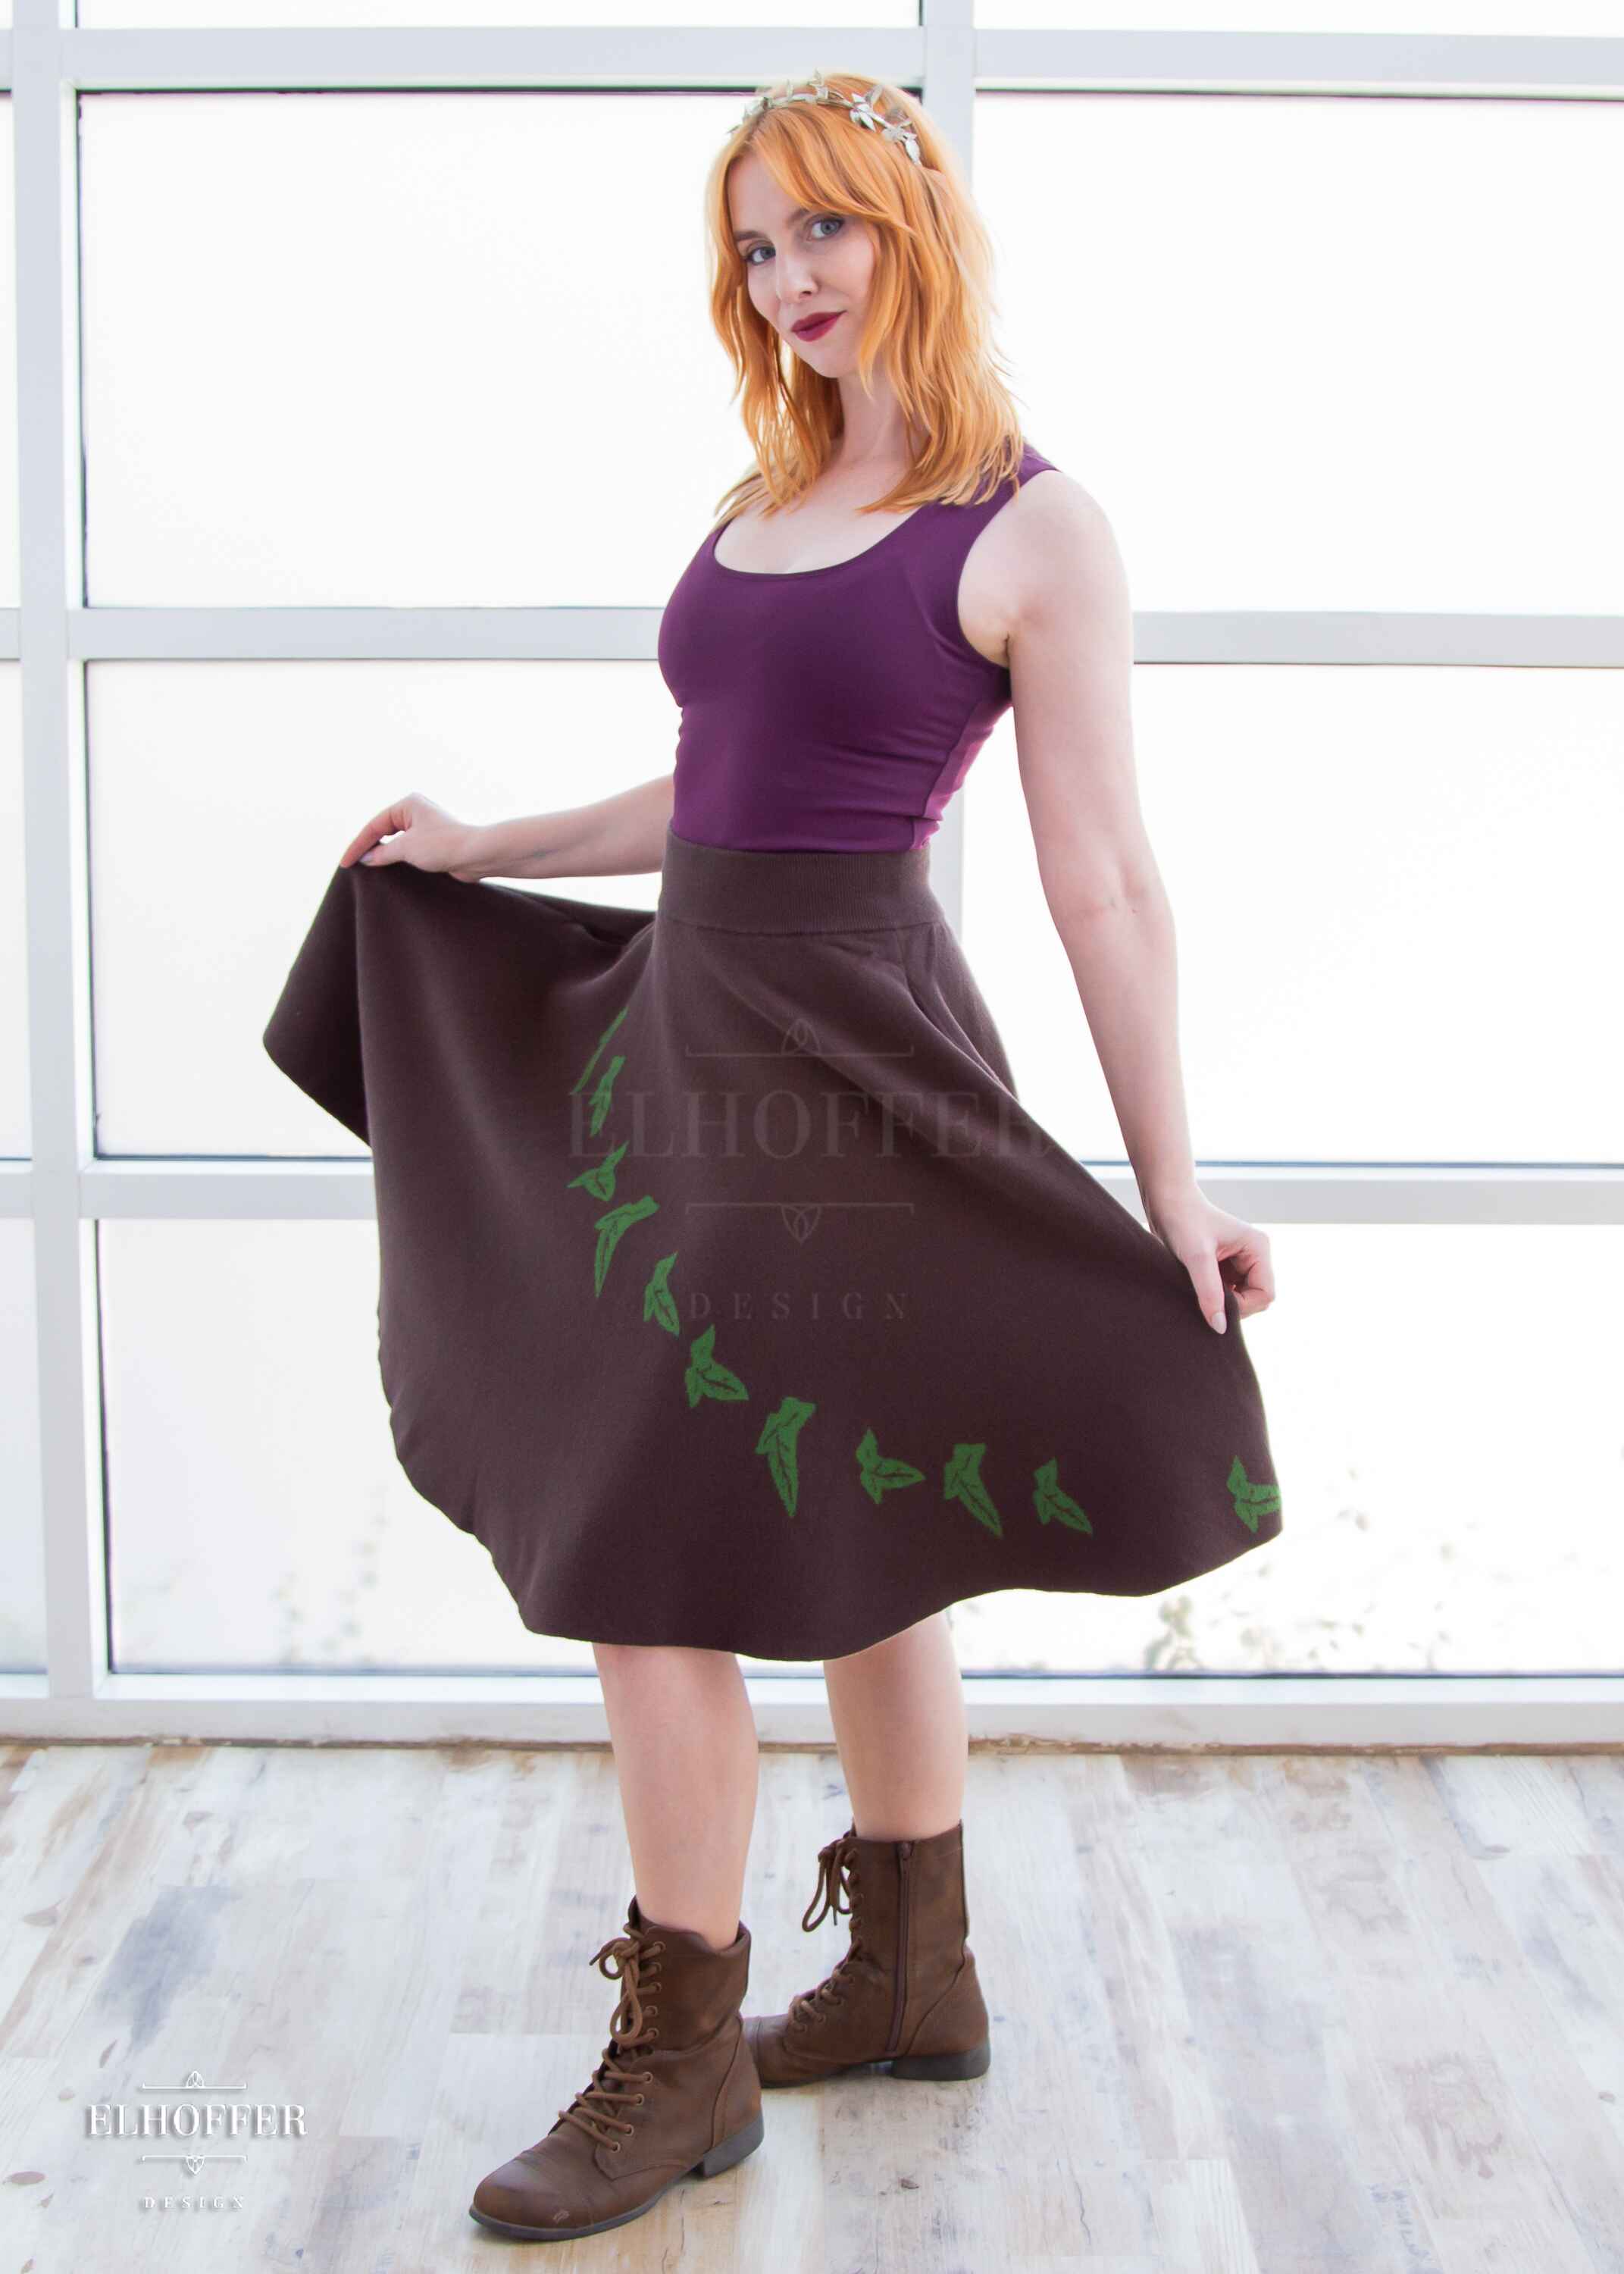 Harley, a fair skinned S model with shoulder length strawberry blonde hair, is wearing a brown knit skirt that hits just passed the knee and has a cascading green leaf design and a dark purple scoop necked crop top.